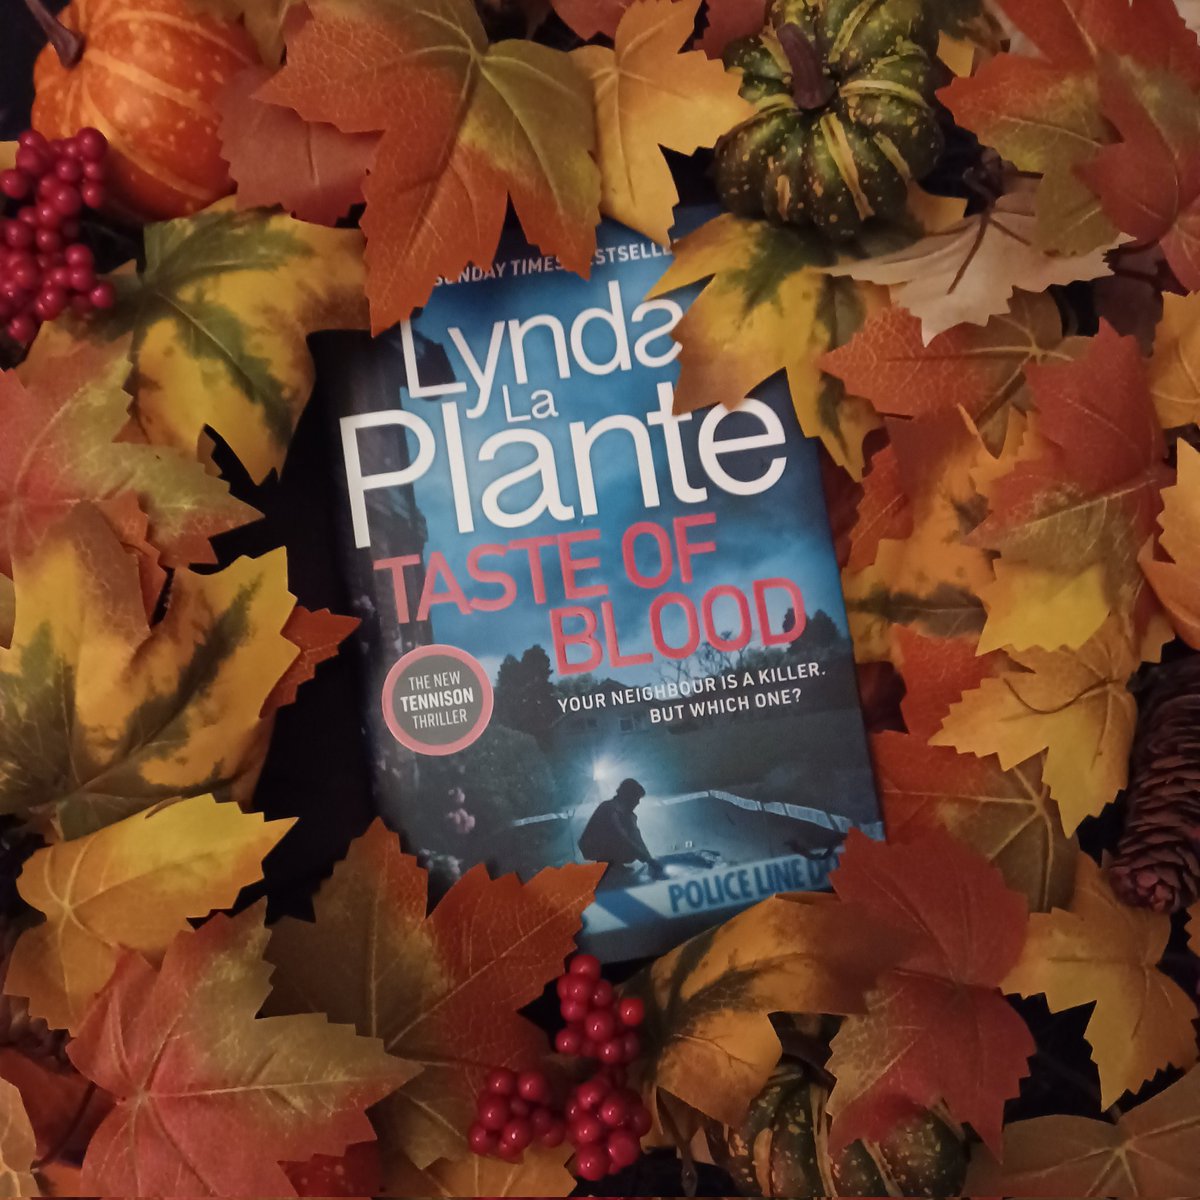 'TASTE OF BLOOD' by @LaPlanteLynda 

⭐⭐⭐⭐⭐

A mysterious case for DI Jane Tennison.

Read my review on my Goodreads blog: goodreads.com/author_blog_po…

#autumnreads #policeprocedural #crimefiction #bookreview #bookblog #goodreads #primesuspect #janetennison